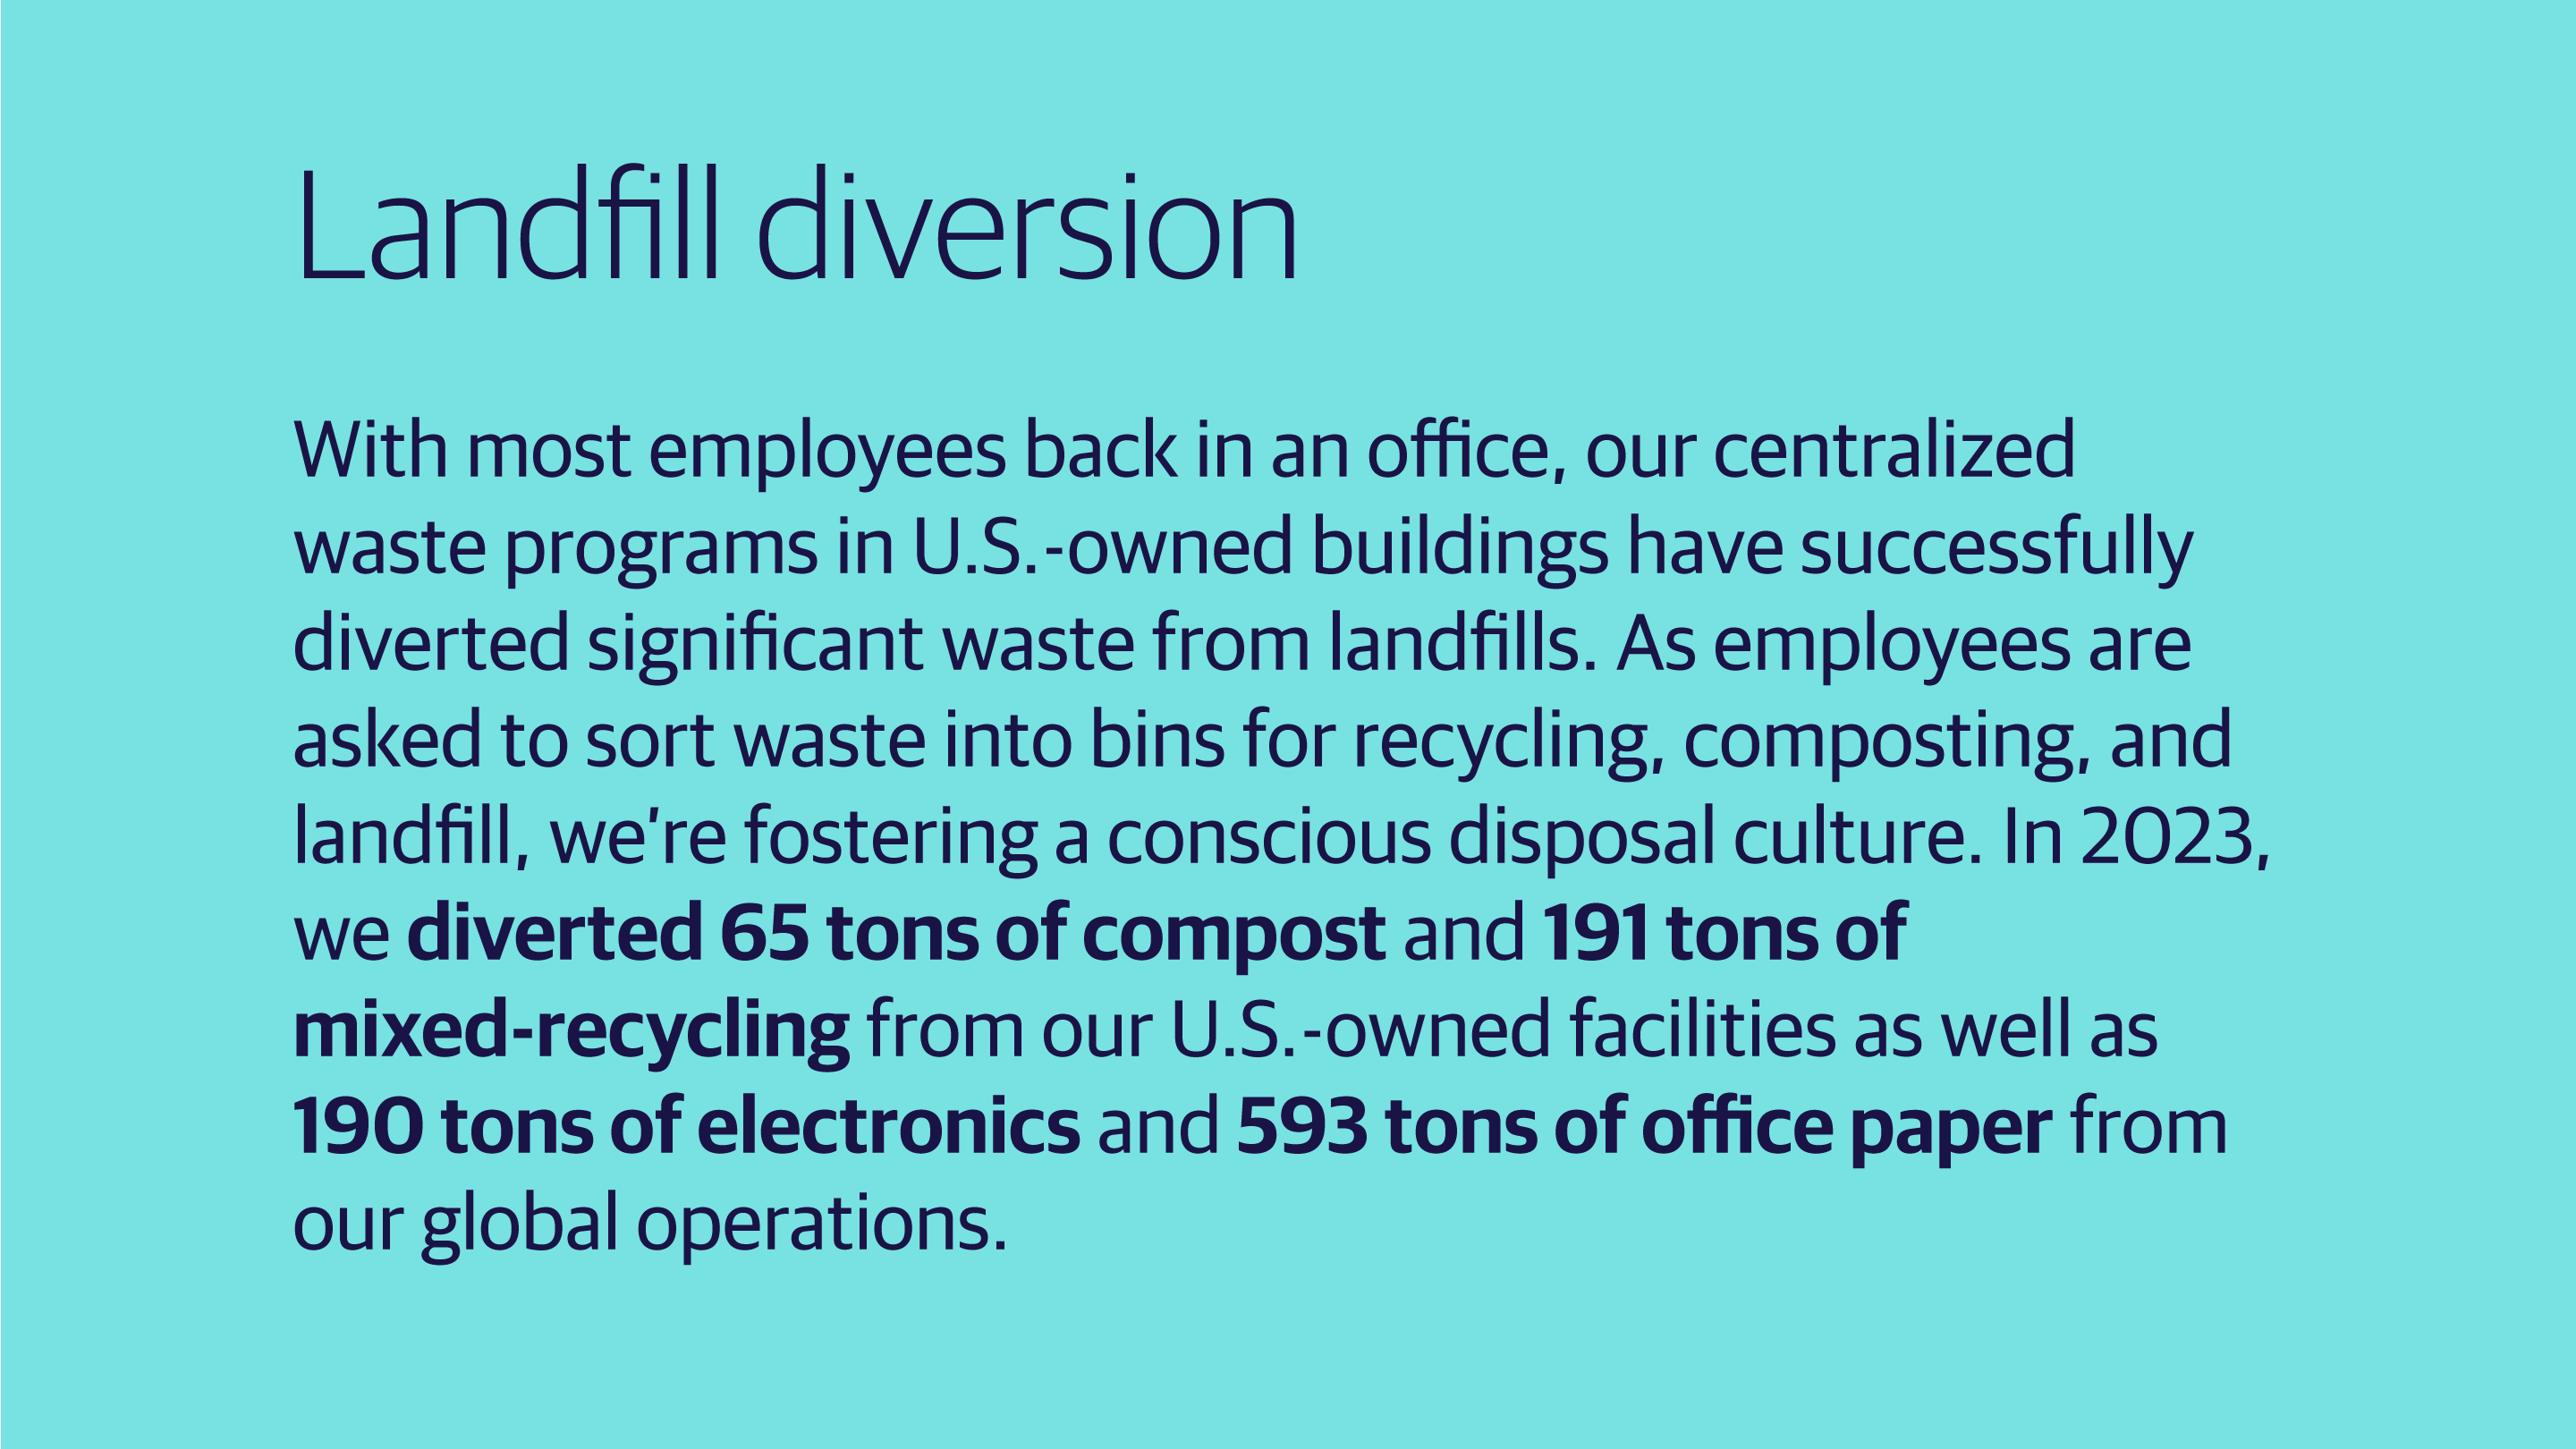 (slide 4 of 4) Landfill diversion With most employees back in an office, our centralized waste programs in U.S.-owned buildings have successfully diverted significant waste from landfills. As employees are asked to sort waste into bins for recycling, composting, and landfill, we’re fostering a conscious disposal culture. In 2023, we diverted 65 tons of compost and 191 tons of mixed-recycling from our U.S.-owned facilities as well as 190 tons of electronics and 593 tons of office paper from our global operations.. 